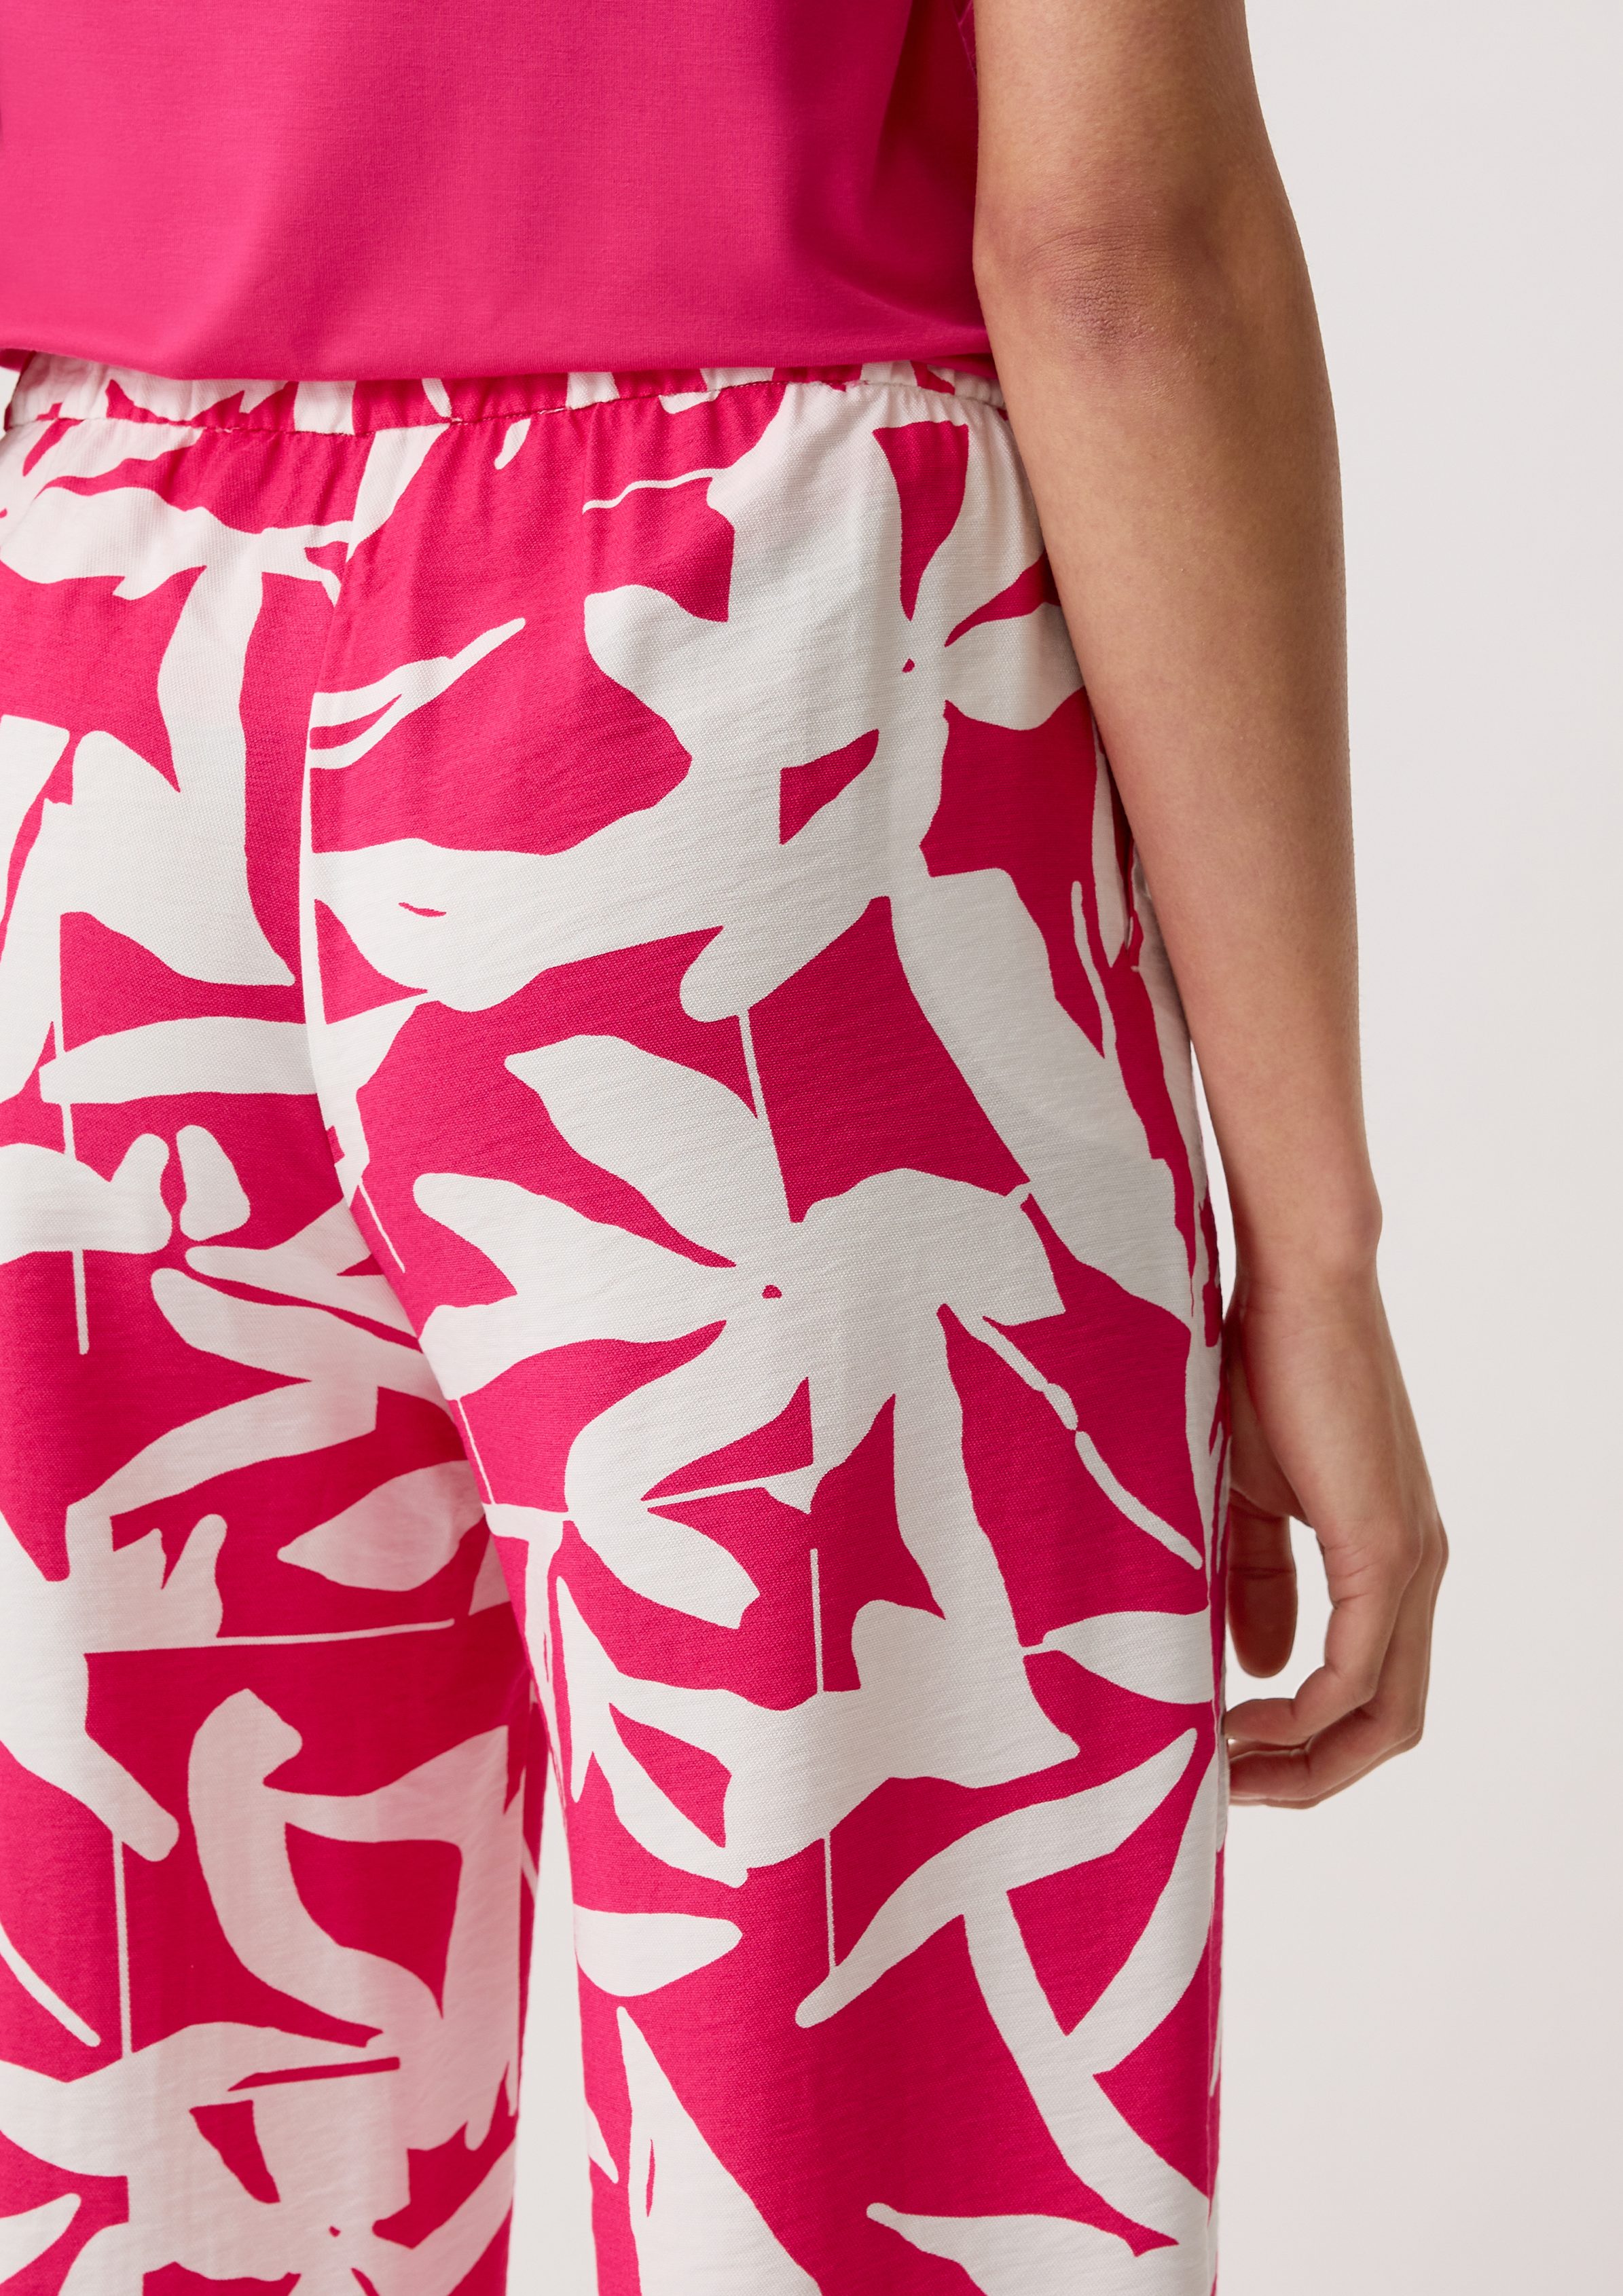 Stoffhose mit Hose Allover-Print Comma Loose: pink